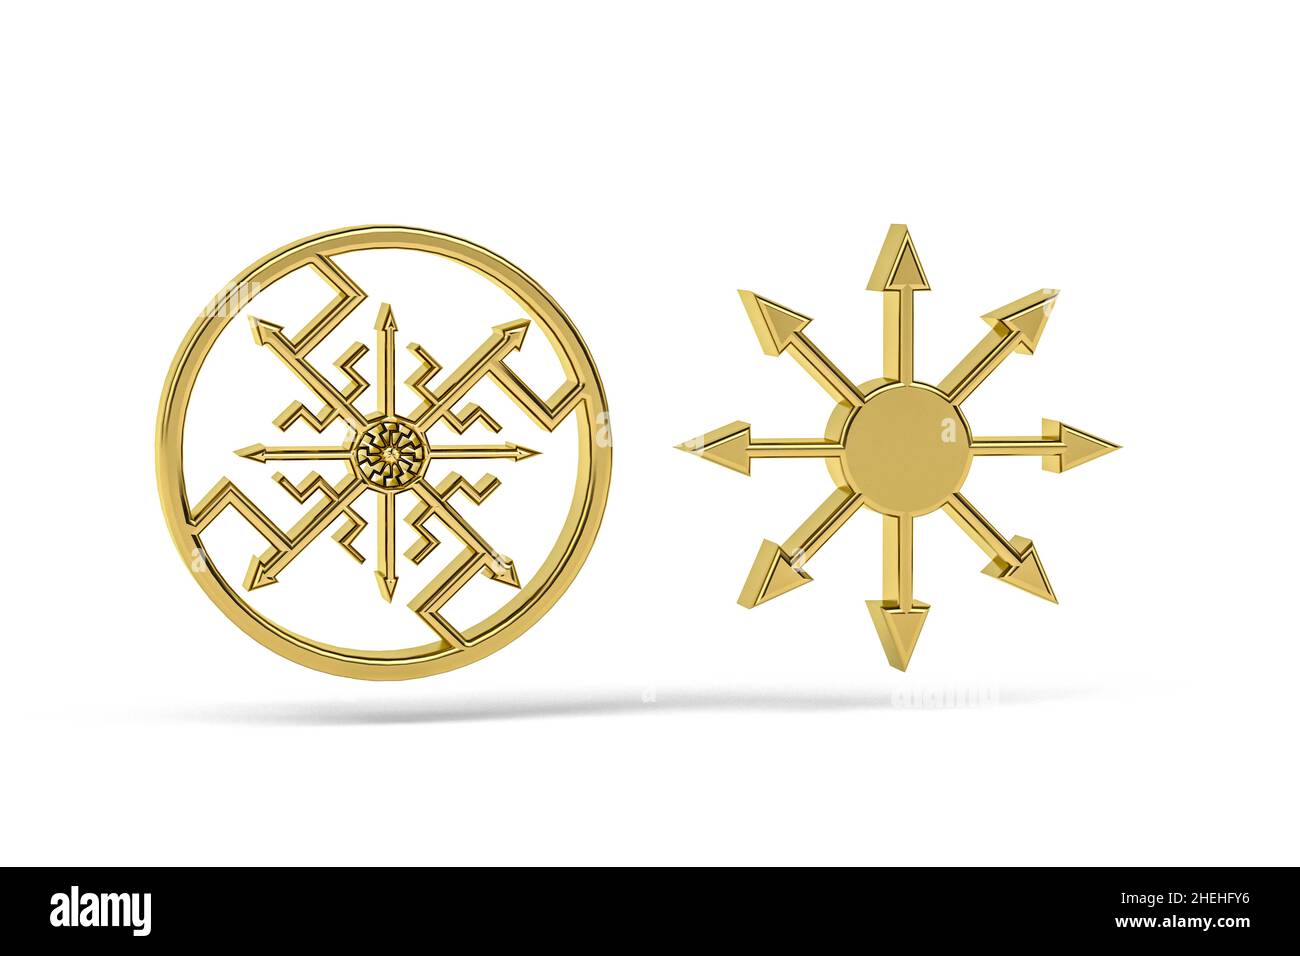 Golden occultism icon isolated on white background - 3D render Stock Photo